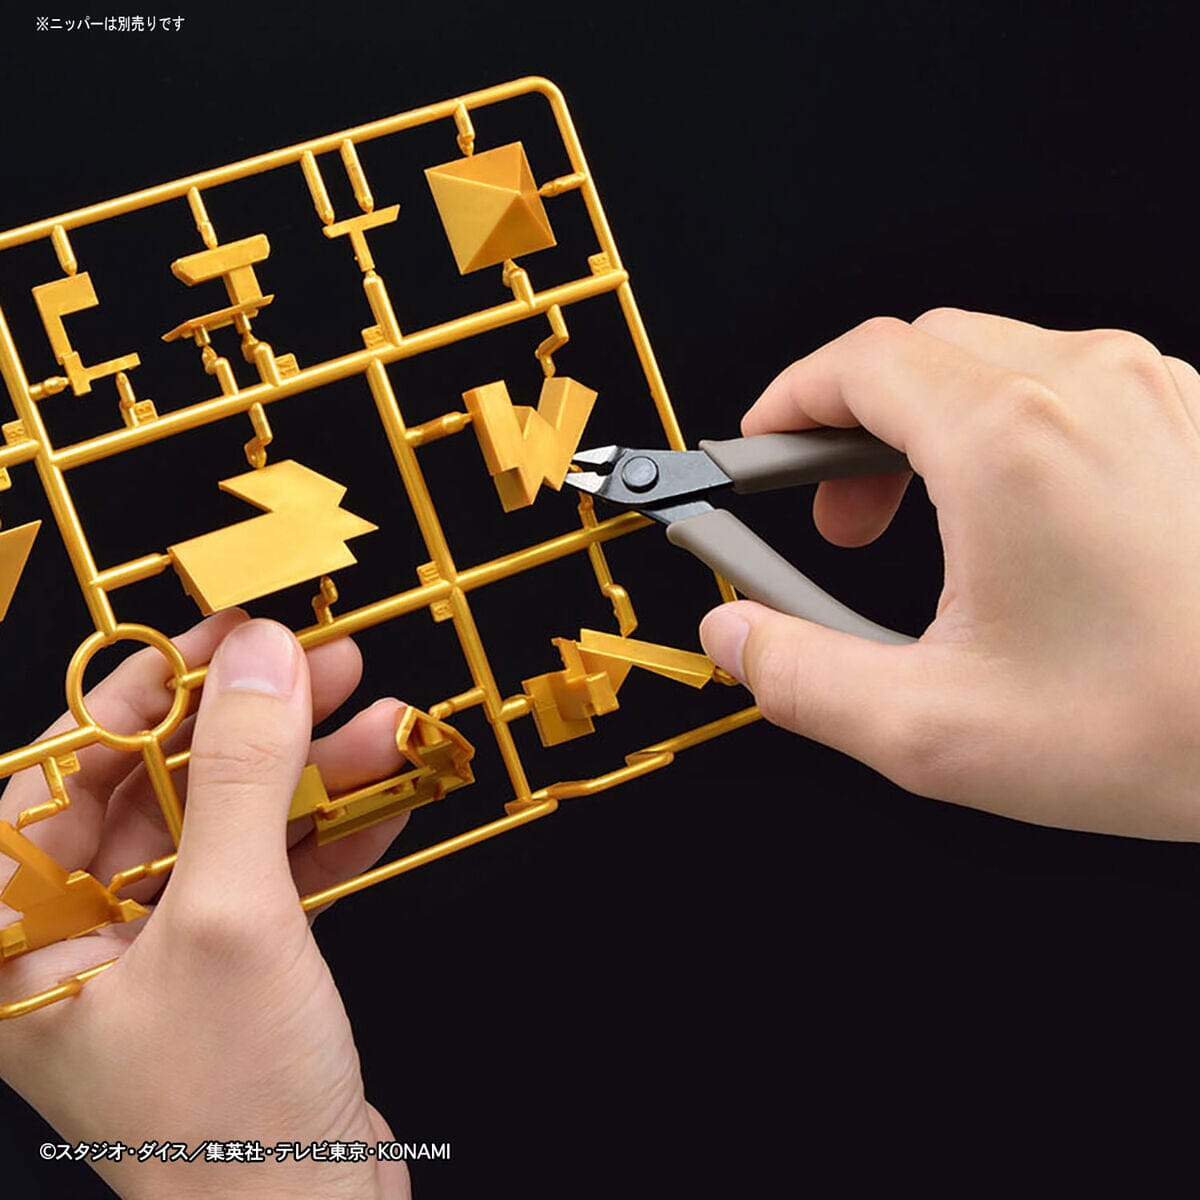 Yu-Gi-Oh! Millennium Puzzle Model Kits and Toys That Fans Love